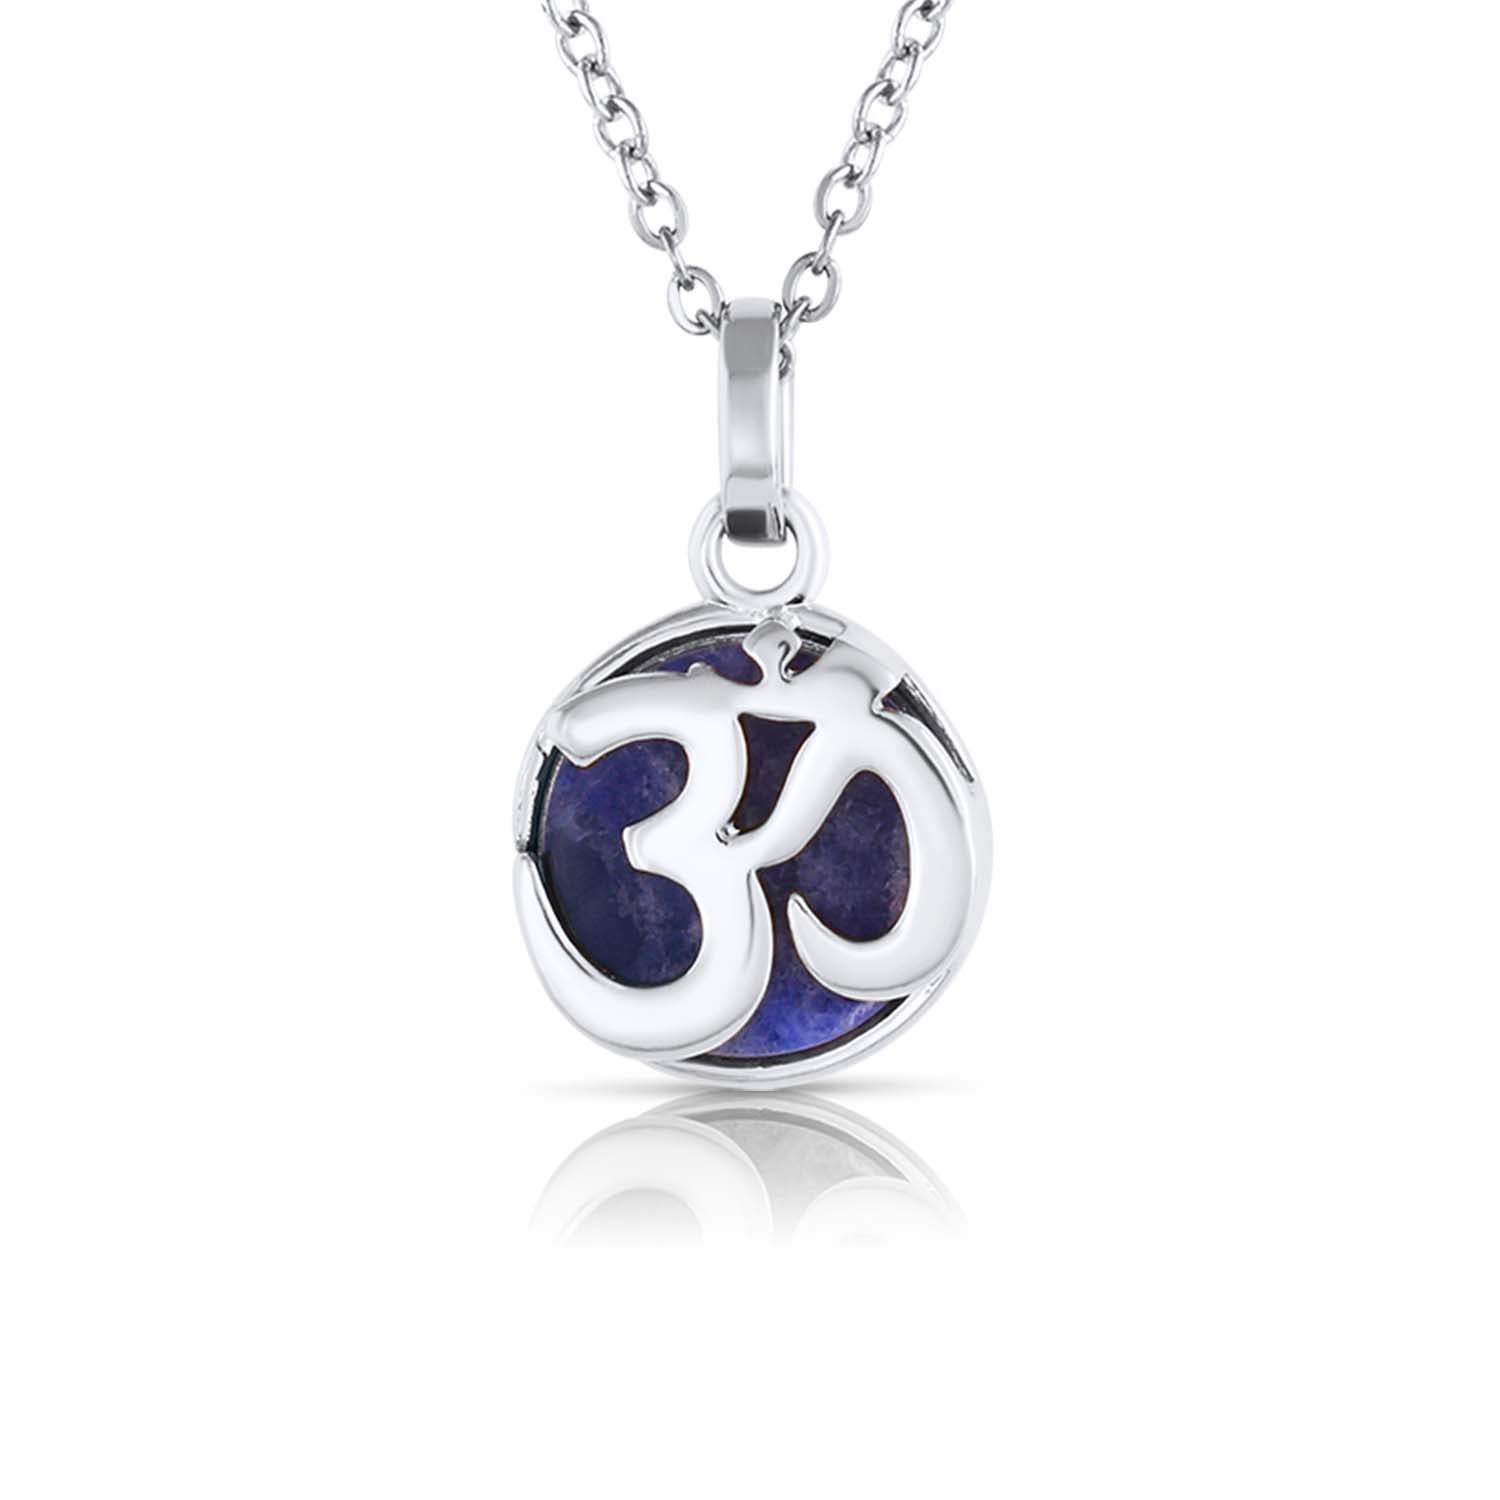 Om Yoga necklace with the third chakra gemstone crystal, Blue Crystal, Lapis Lazuli. Made by Born to Rock Jewelry